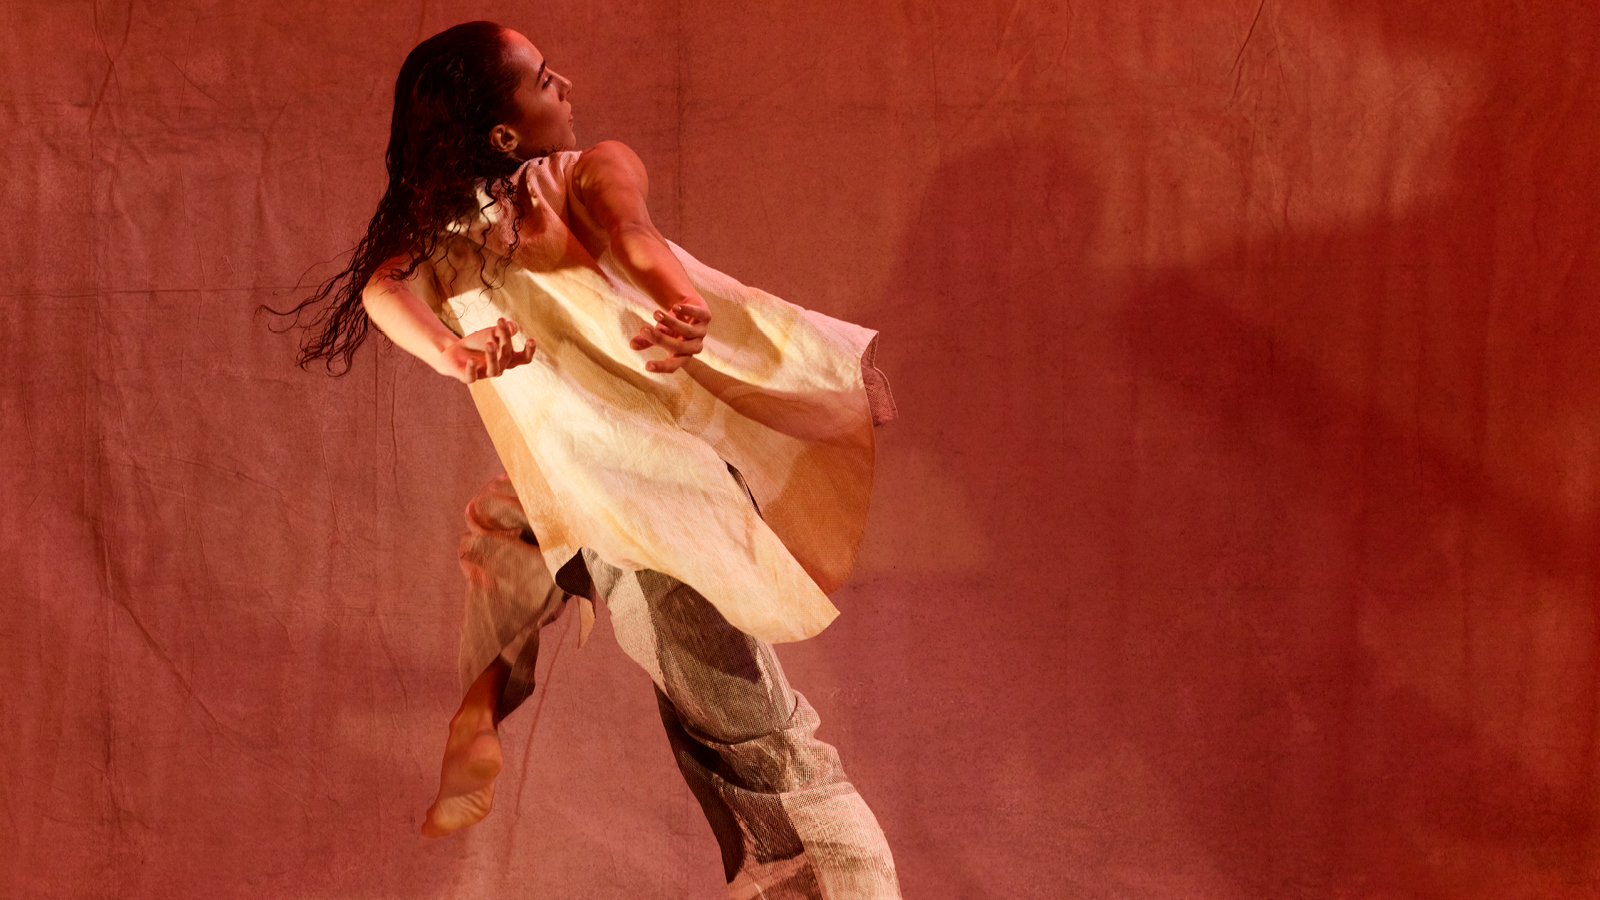 The back of a dancer in mid movement with one leg lifted and hands thrown back. Head looking to one side, against an ochre coloured backdrop.